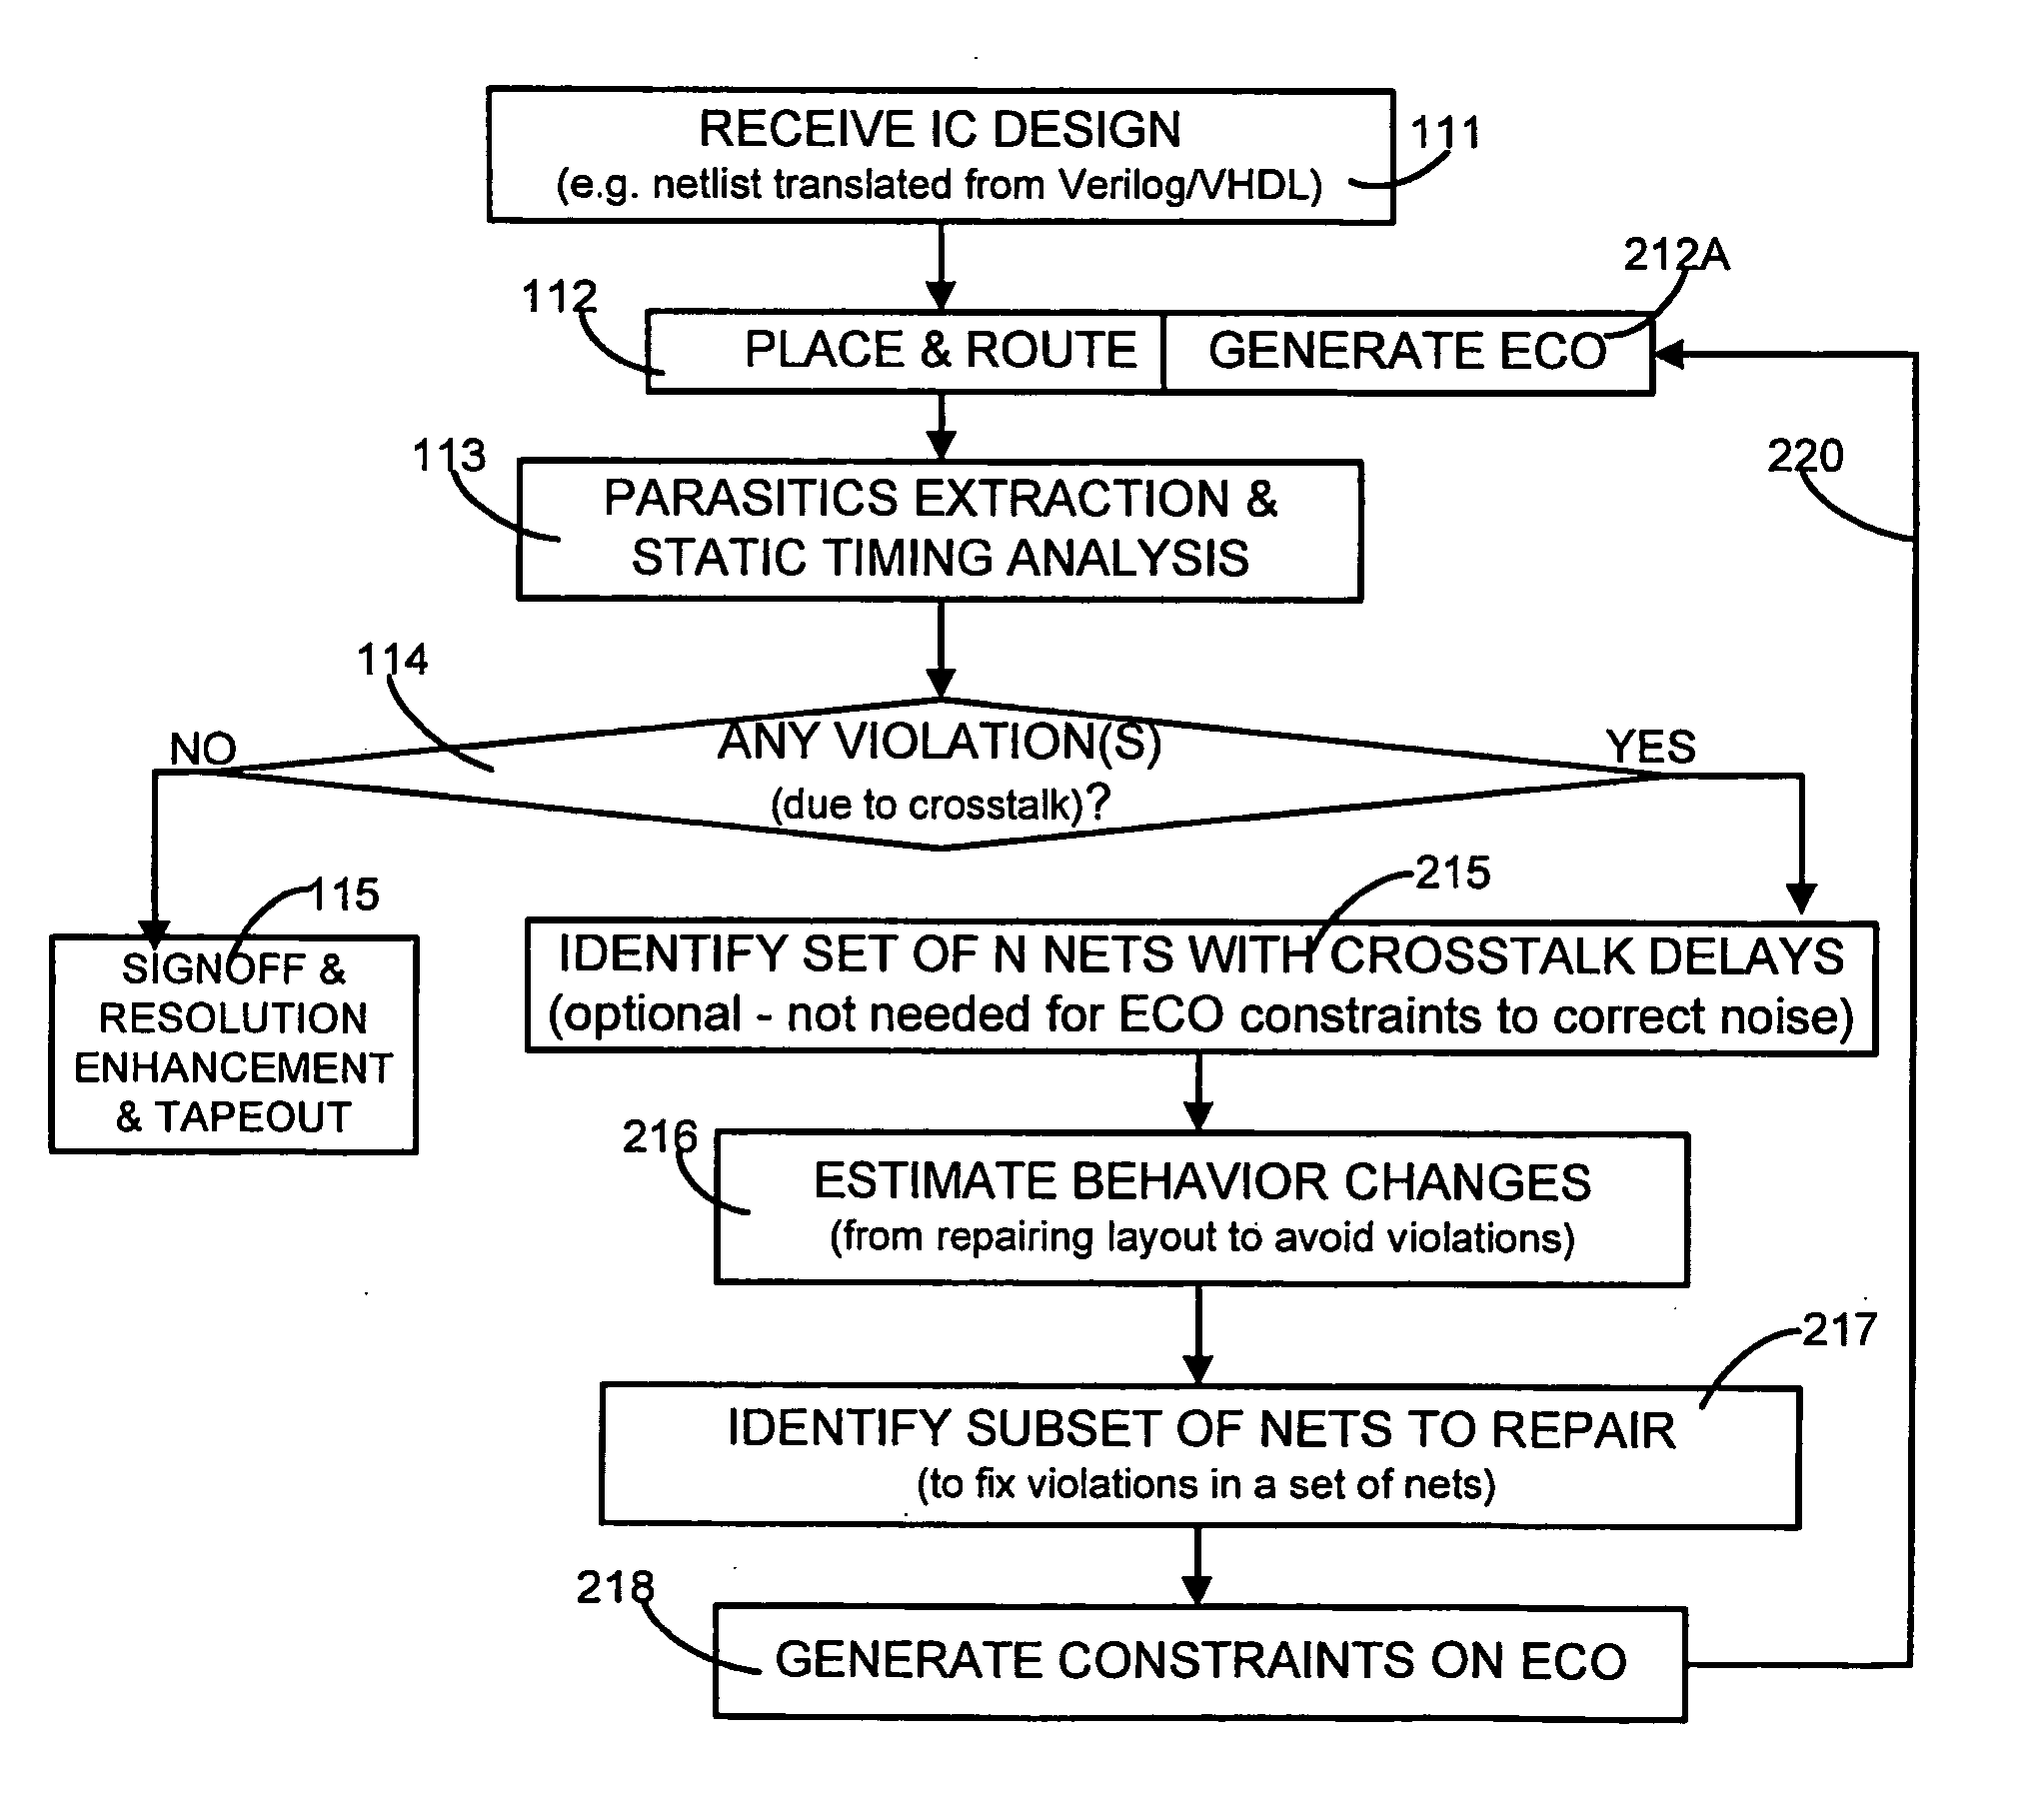 Generation of engineering change order (ECO) constraints for use in selecting ECO repair techniques